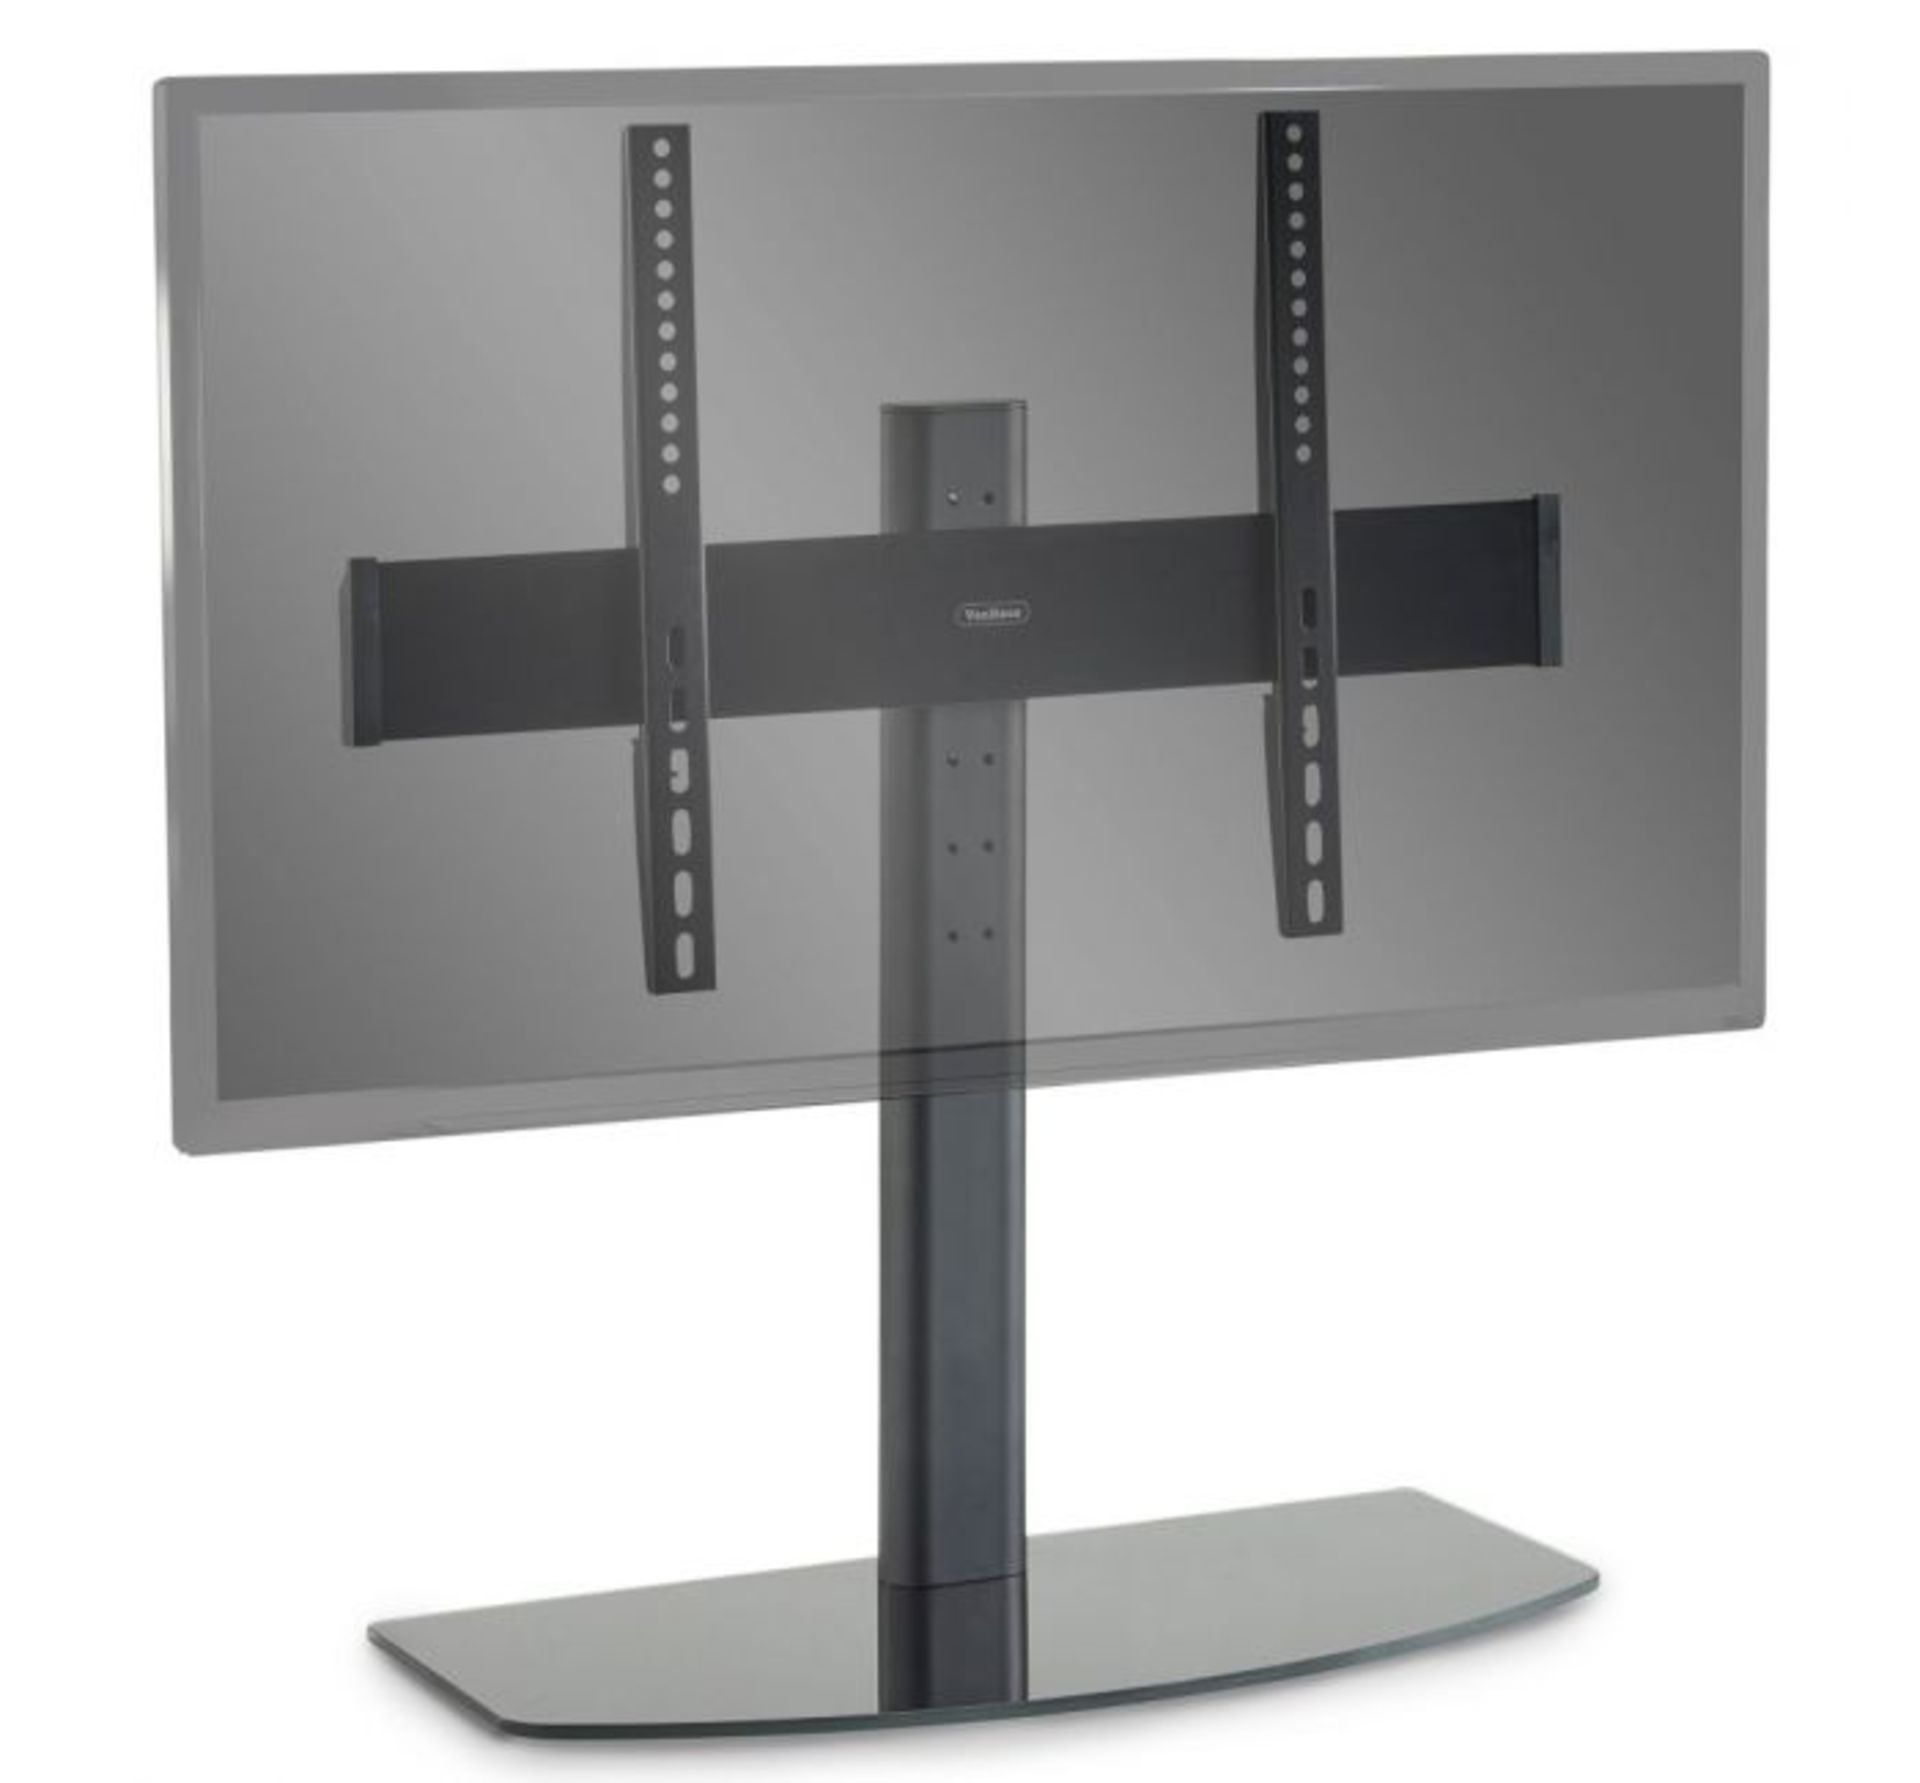 (AP272) 32-55 inch TV stand & bracket Please confirm your TV’s VESA Mounting Dimensions and ... - Image 2 of 2